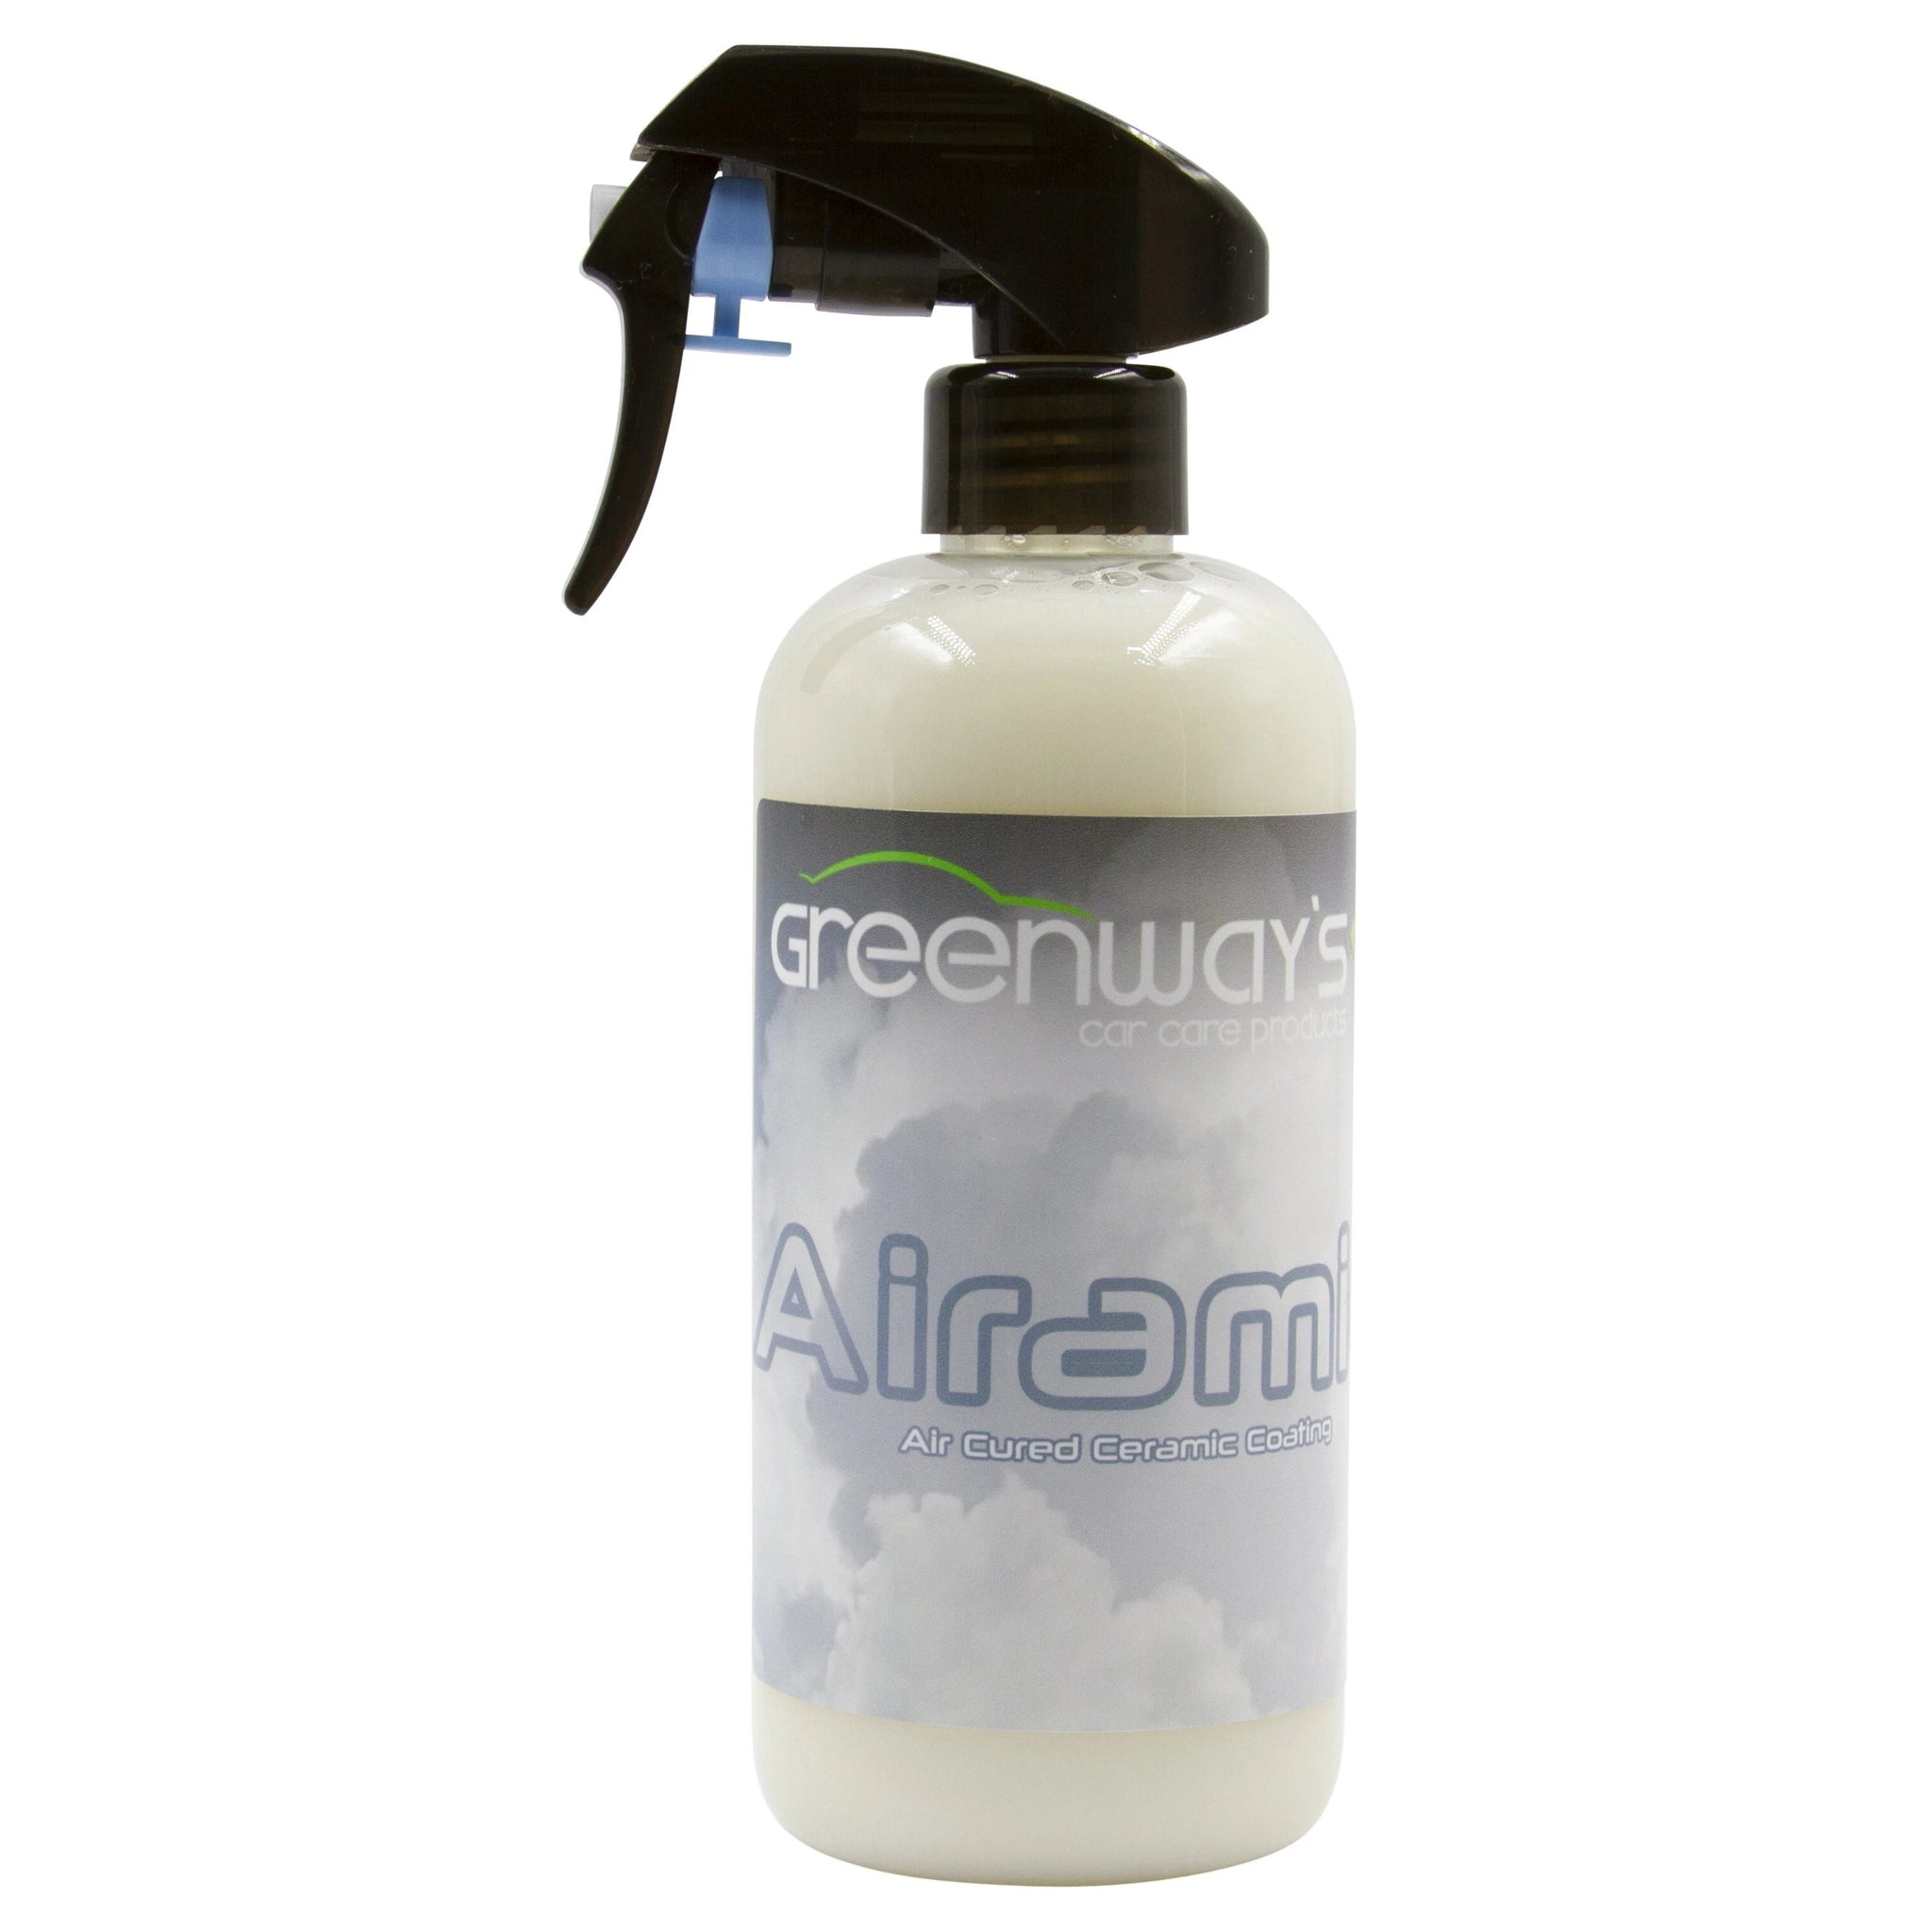 Greenway’s Airamic, air curing ceramic coating spray sealant for paint, glass, plastic, rubber, 2 year duration, 16 ounces.